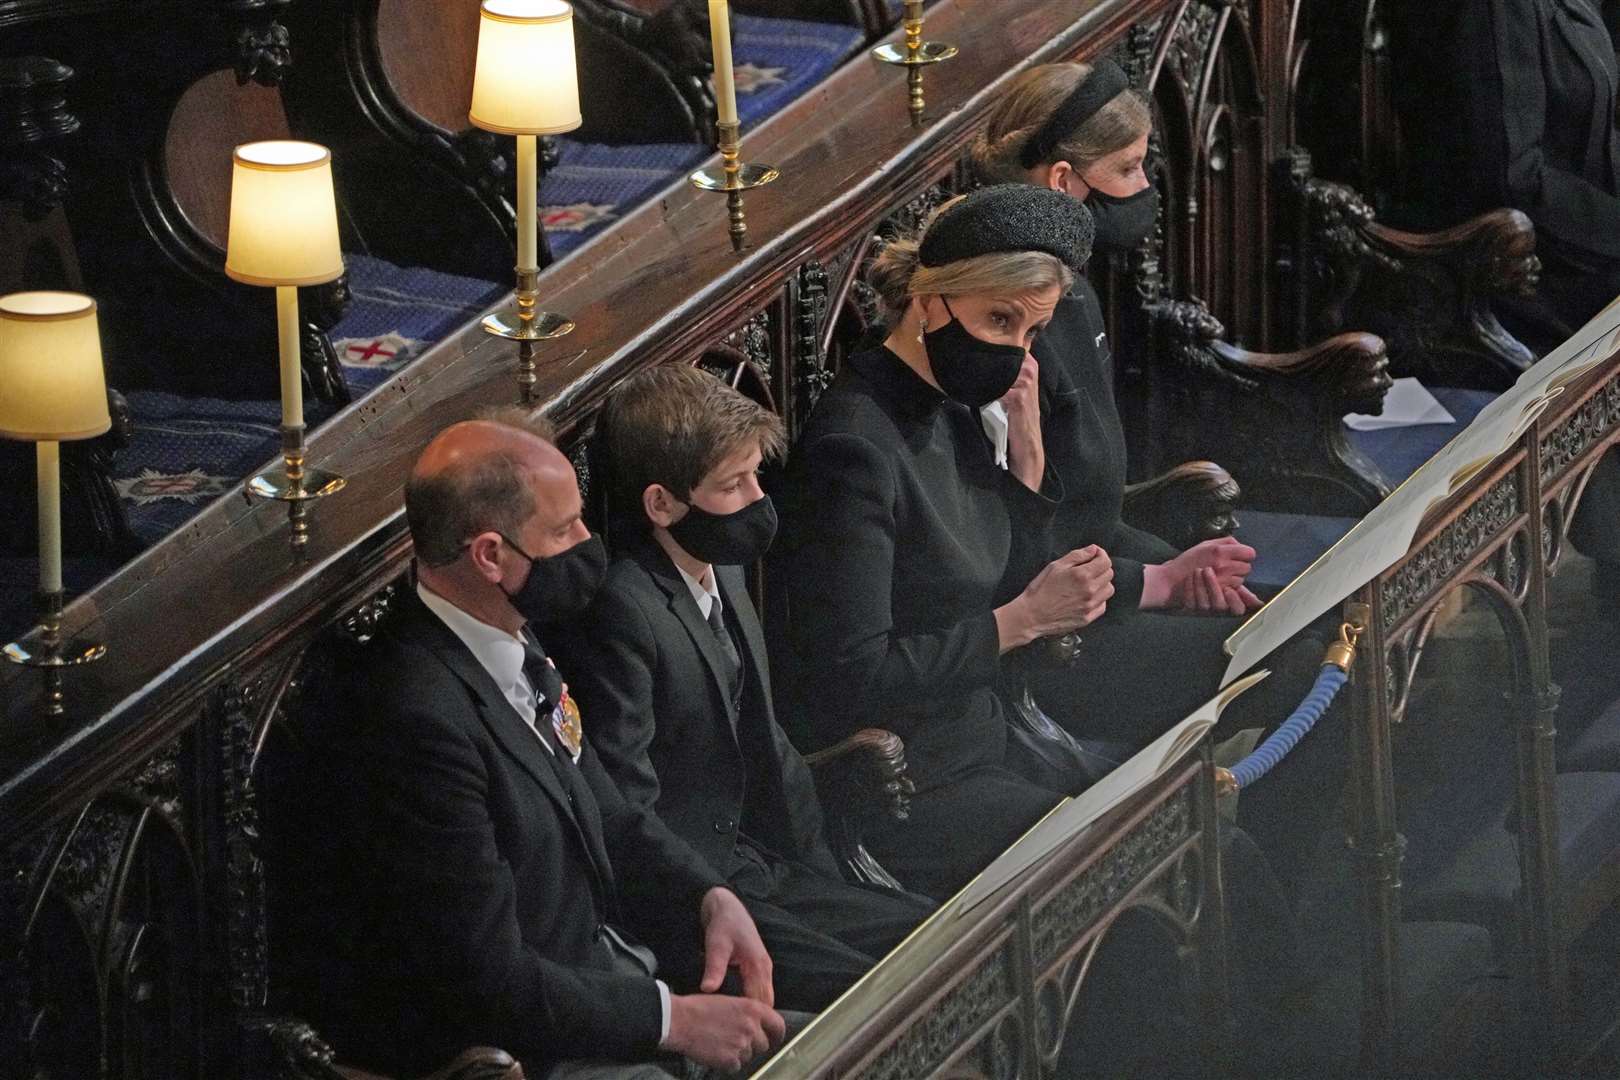 The Earl of Wessex, James Viscount Severn, the Countess of Wessex and Lady Louise Windsor during the funeral (Yui Mok/PA)